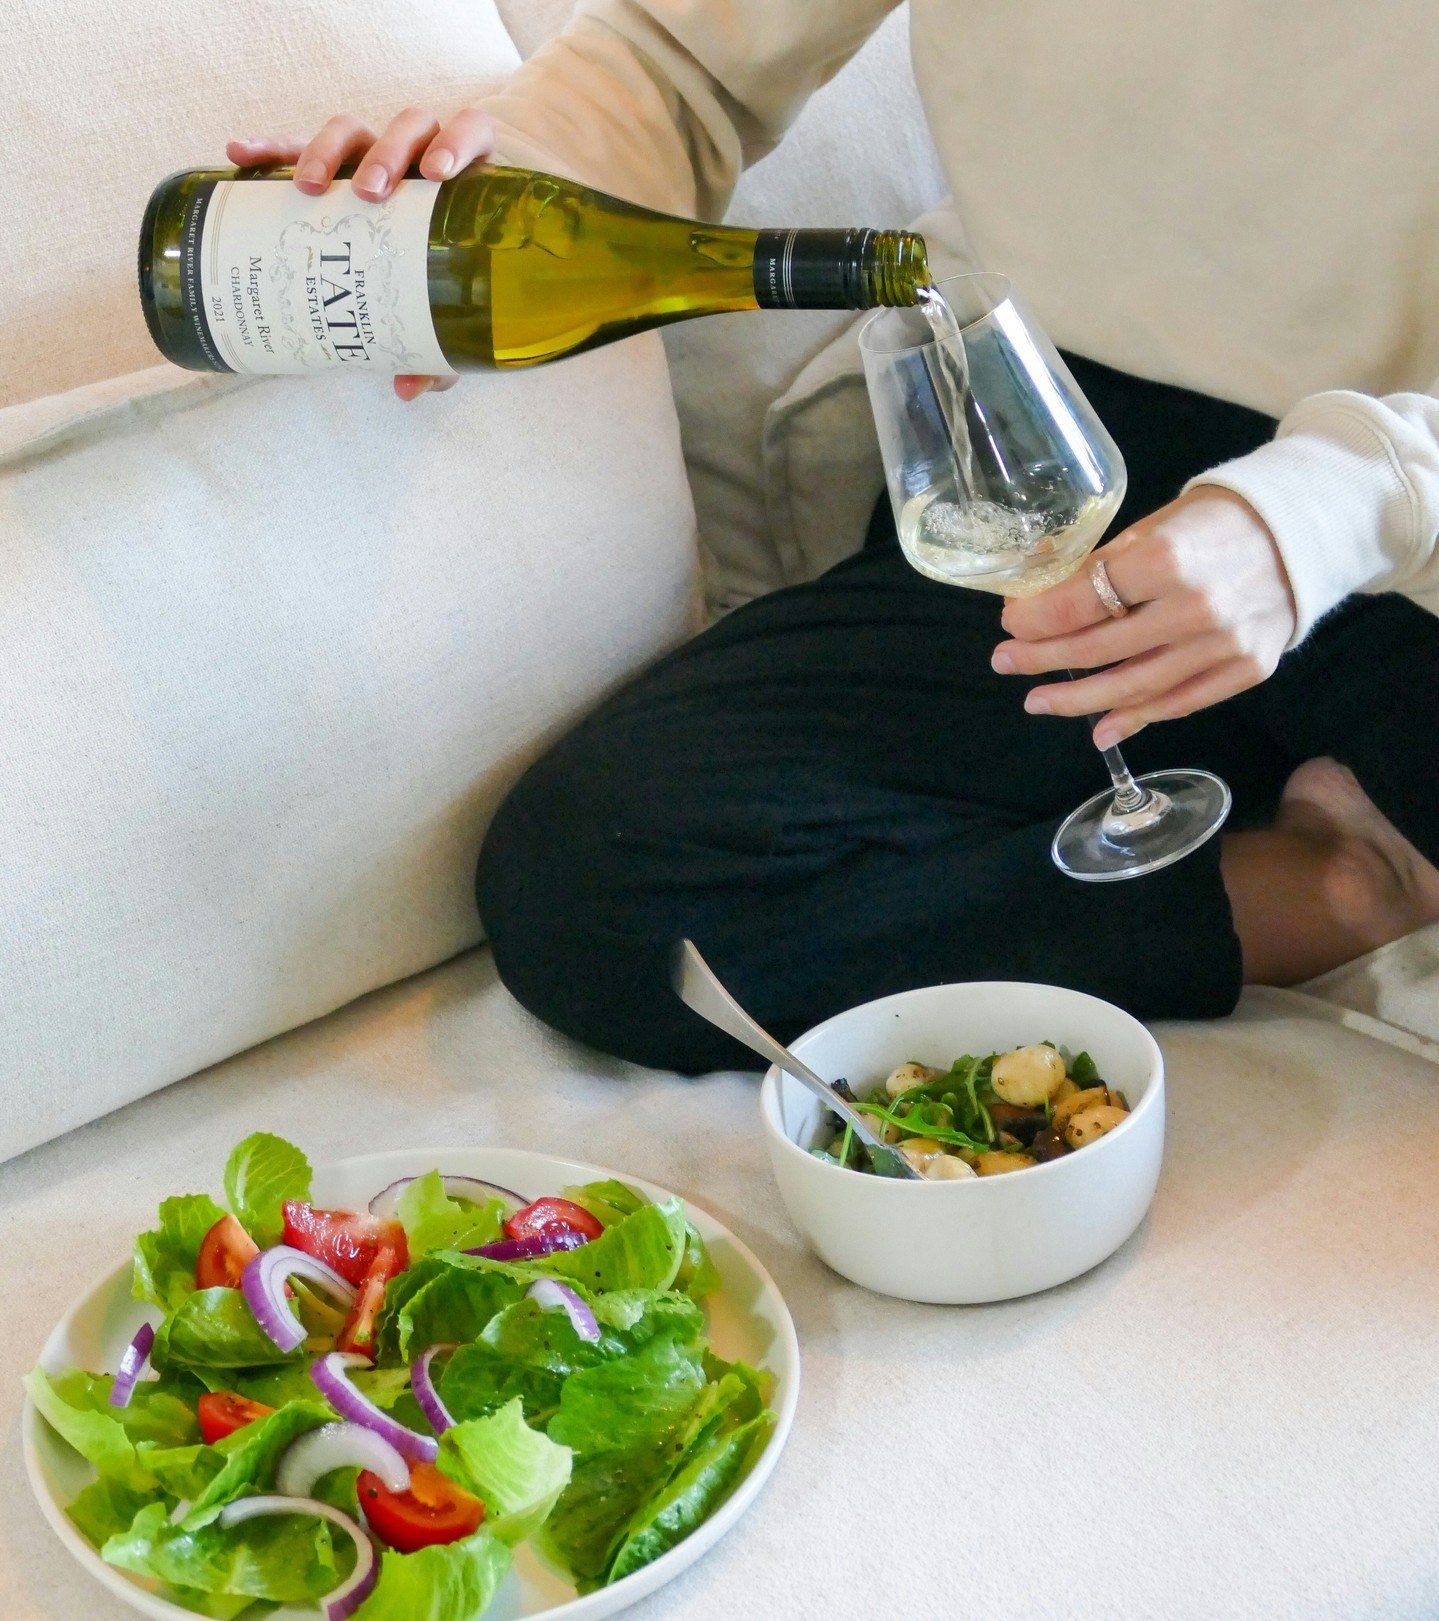 The Franklin Tate Estate Chardonnay has emanating fresh, crisp notes of lemon, guava, nectarine and melons. It makes the perfect dinner pairing with fresh salad greens and a light pasta.